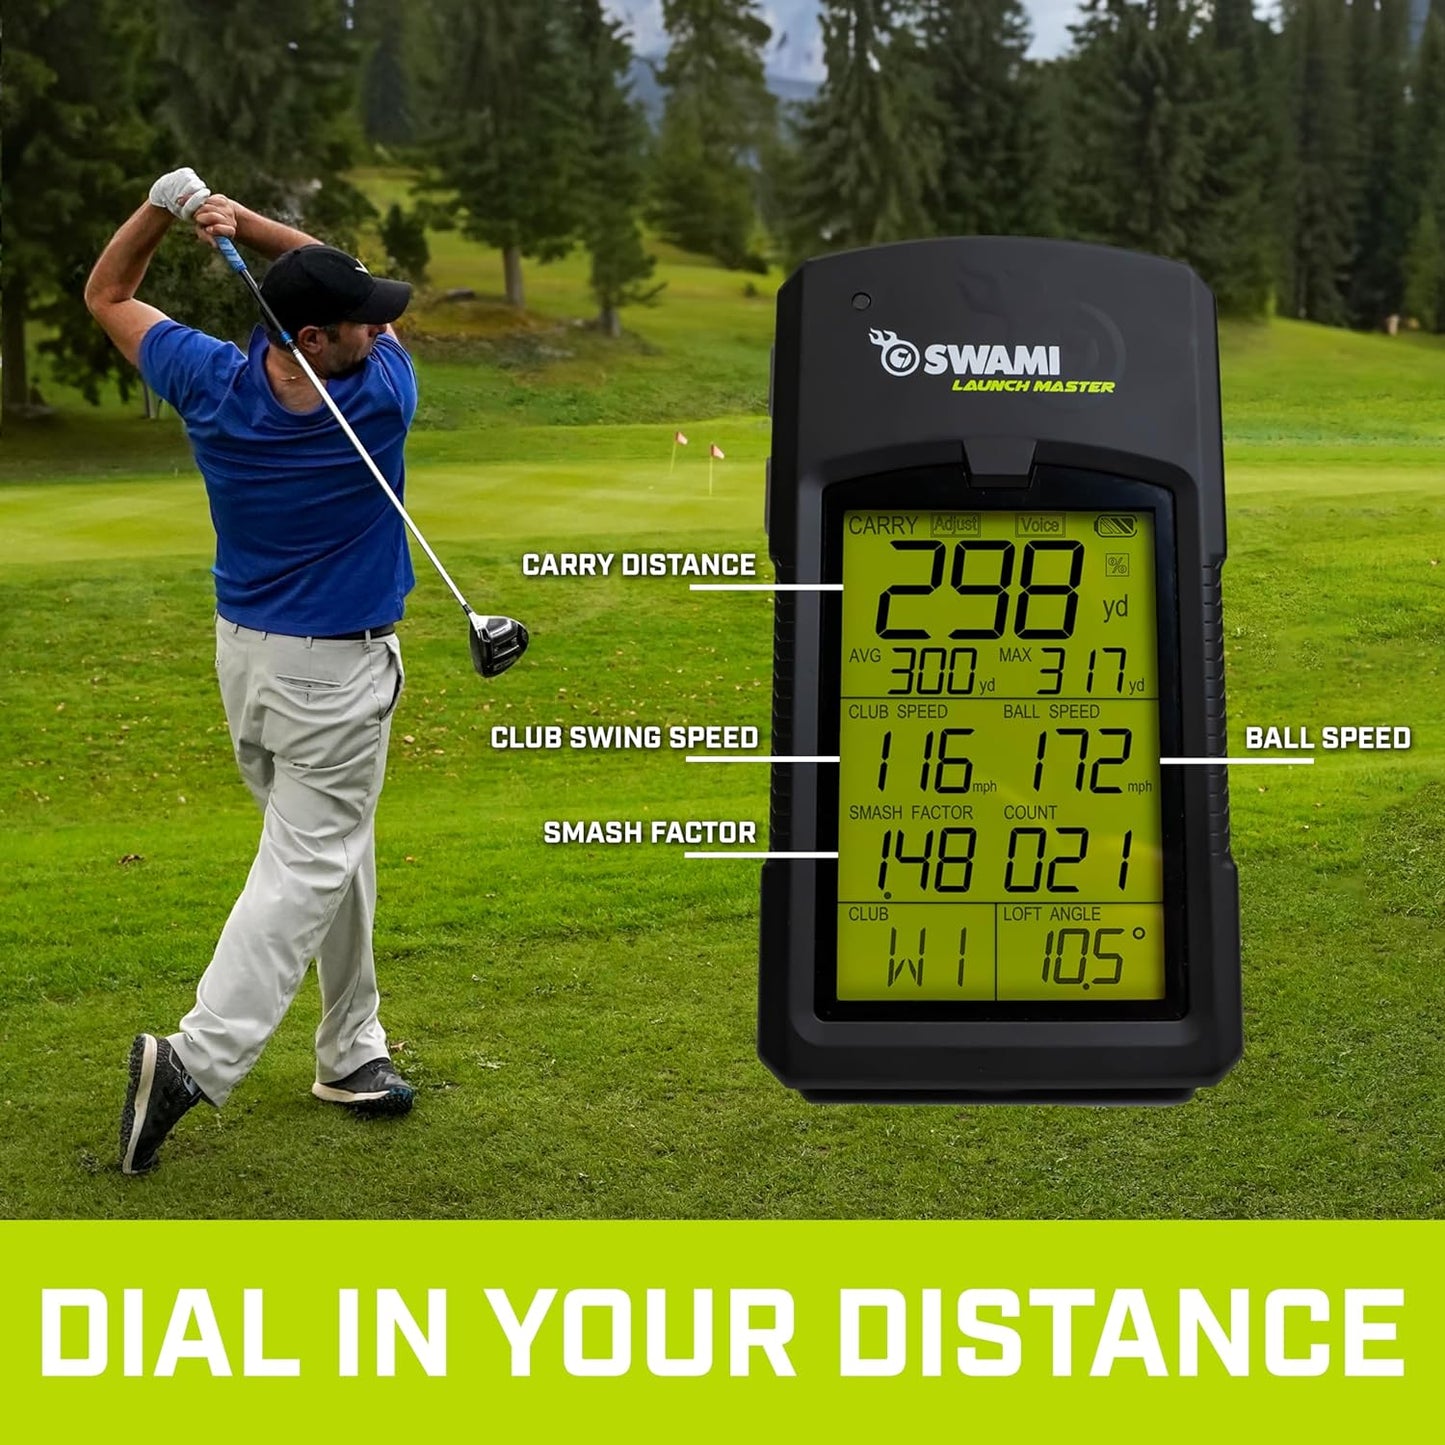 Golf Swami Launch Master Launch Monitor - Golf Training Ball Striking Analysis Tracking Club Head Speed, Ball Speed, Smash Factor and Carry Distance